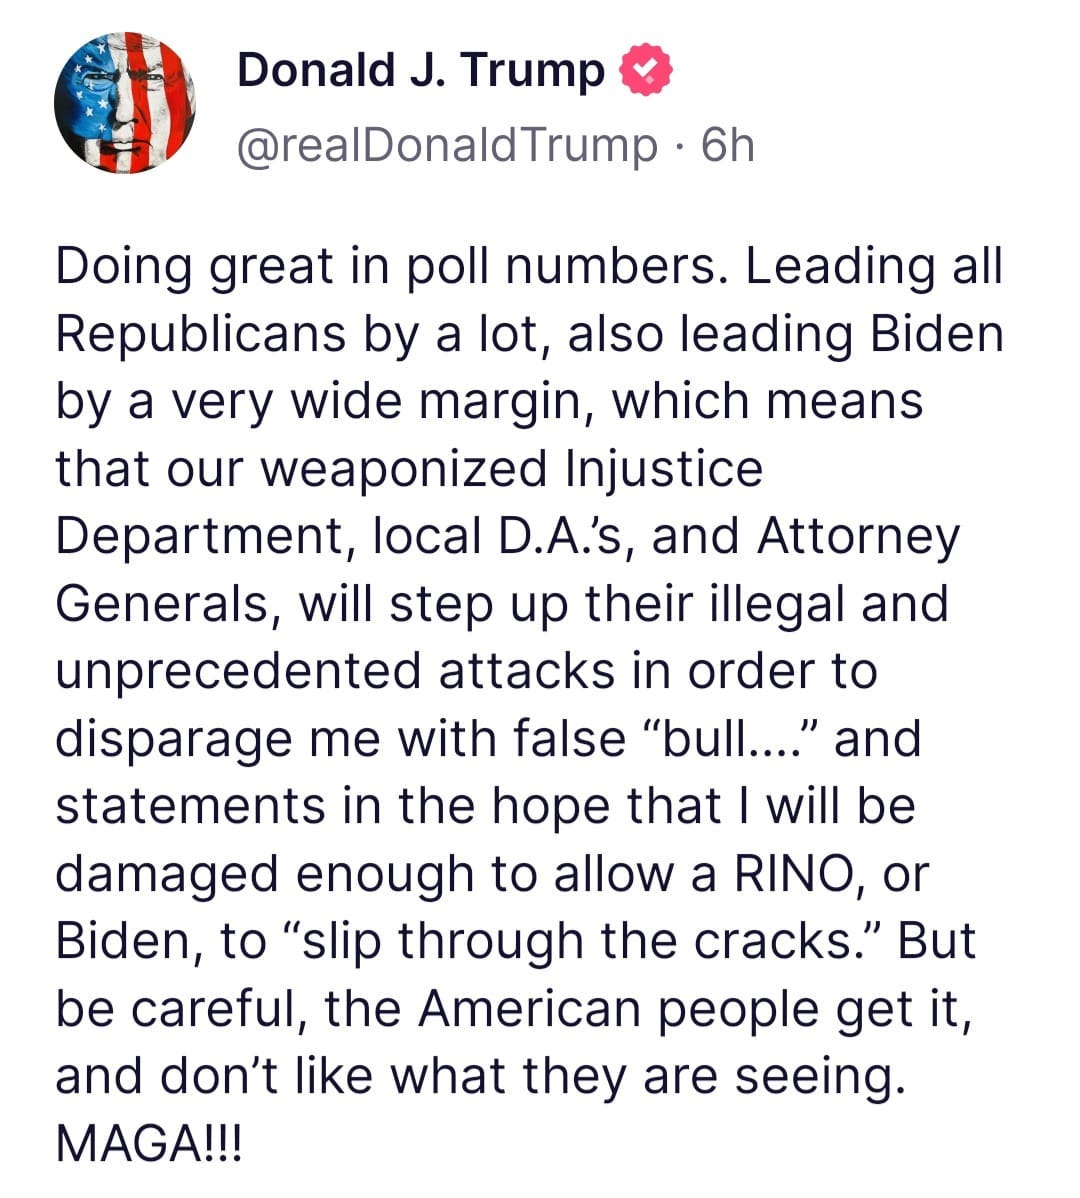 May be an image of text that says 'Donald J. Trump @realDonaldTrump 6h Doing great in poll numbers. Leading all Republicans by a lot, also leading Biden by a very wide margin, which means that our weaponized Injustice Department, local D.A.'s, and Attorney Generals, will step up their illegal and unprecedented attacks in order to disparage me with false "bull...." and statements in the hope that will be damaged enough to allow a RINO, or Biden, to 'slip through the cracks." But be careful, the American people get it, and don't like what they are seeing. MAGA!!!'